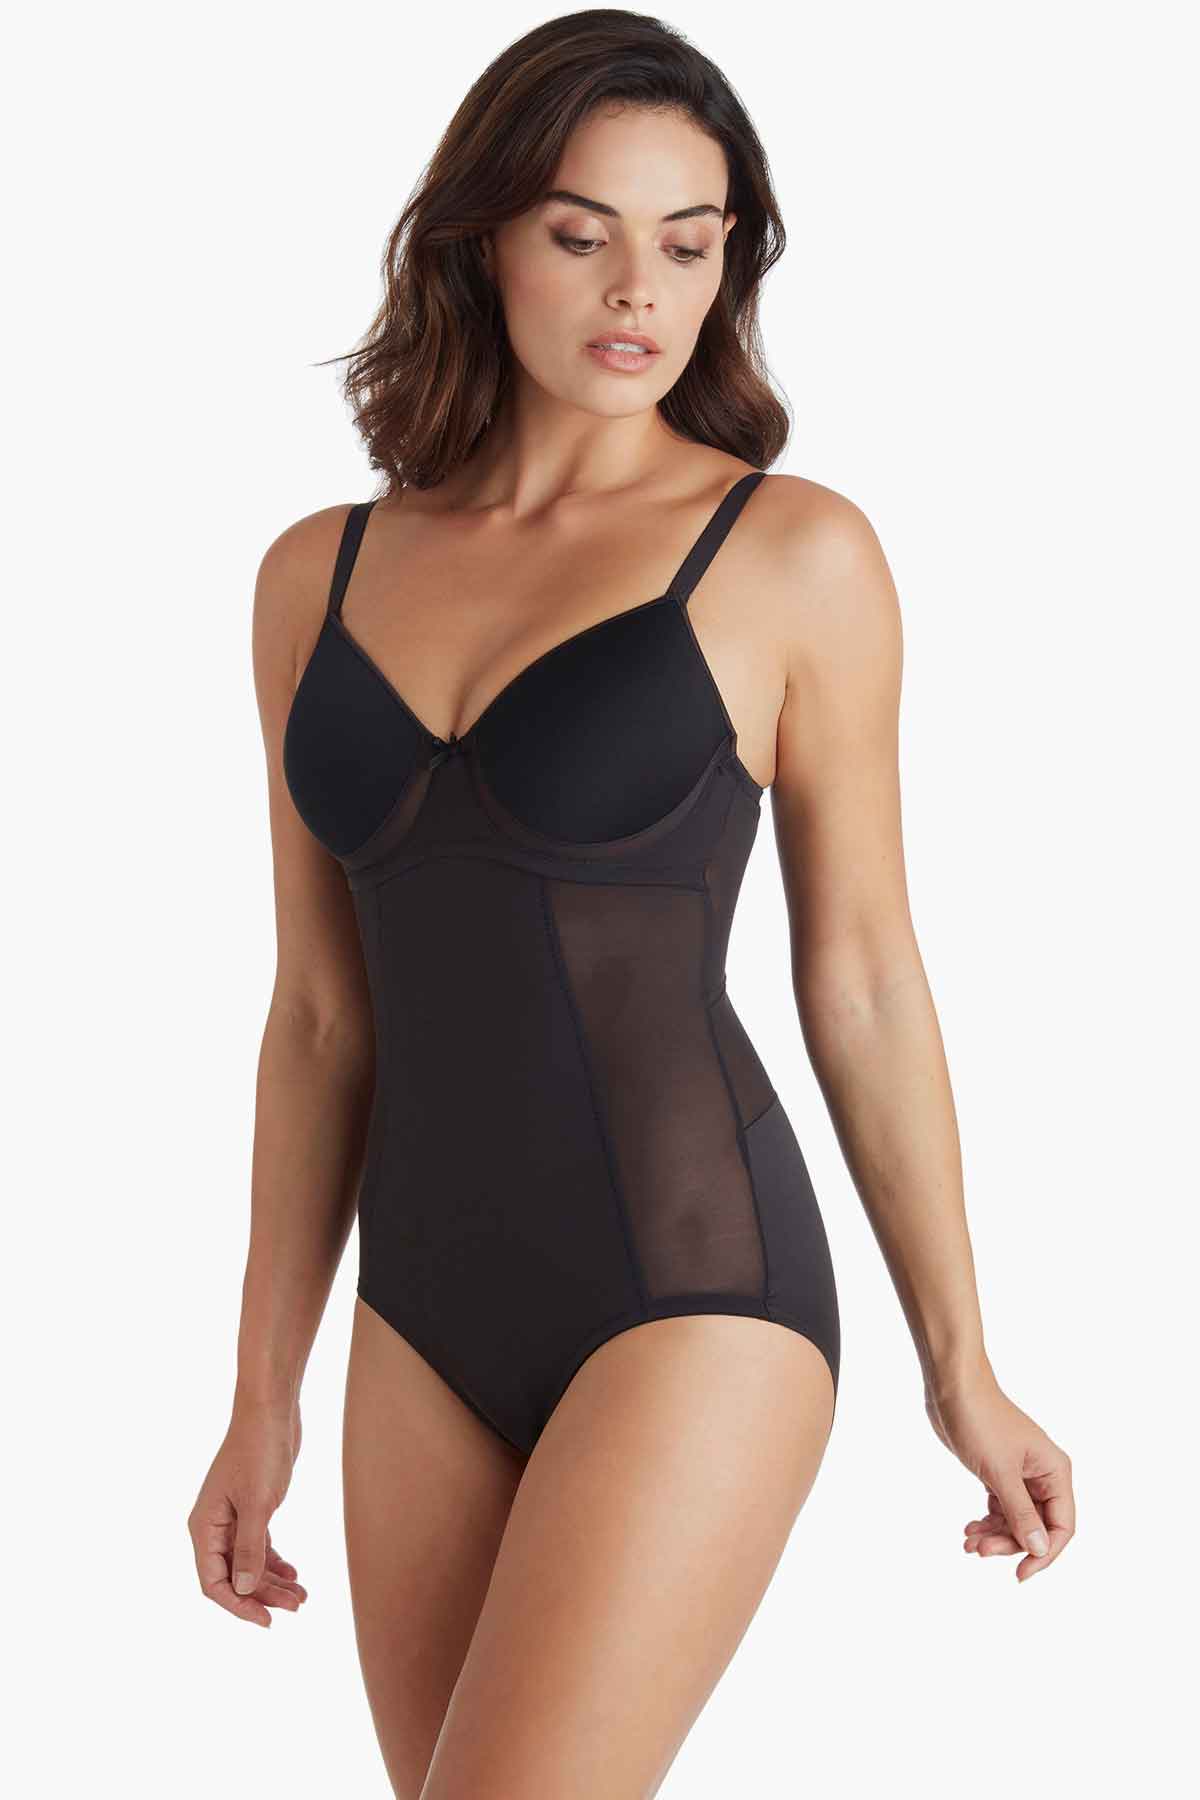 Miraclesuit womens Extra Firm Sexy Sheer Shaping Bodybriefer